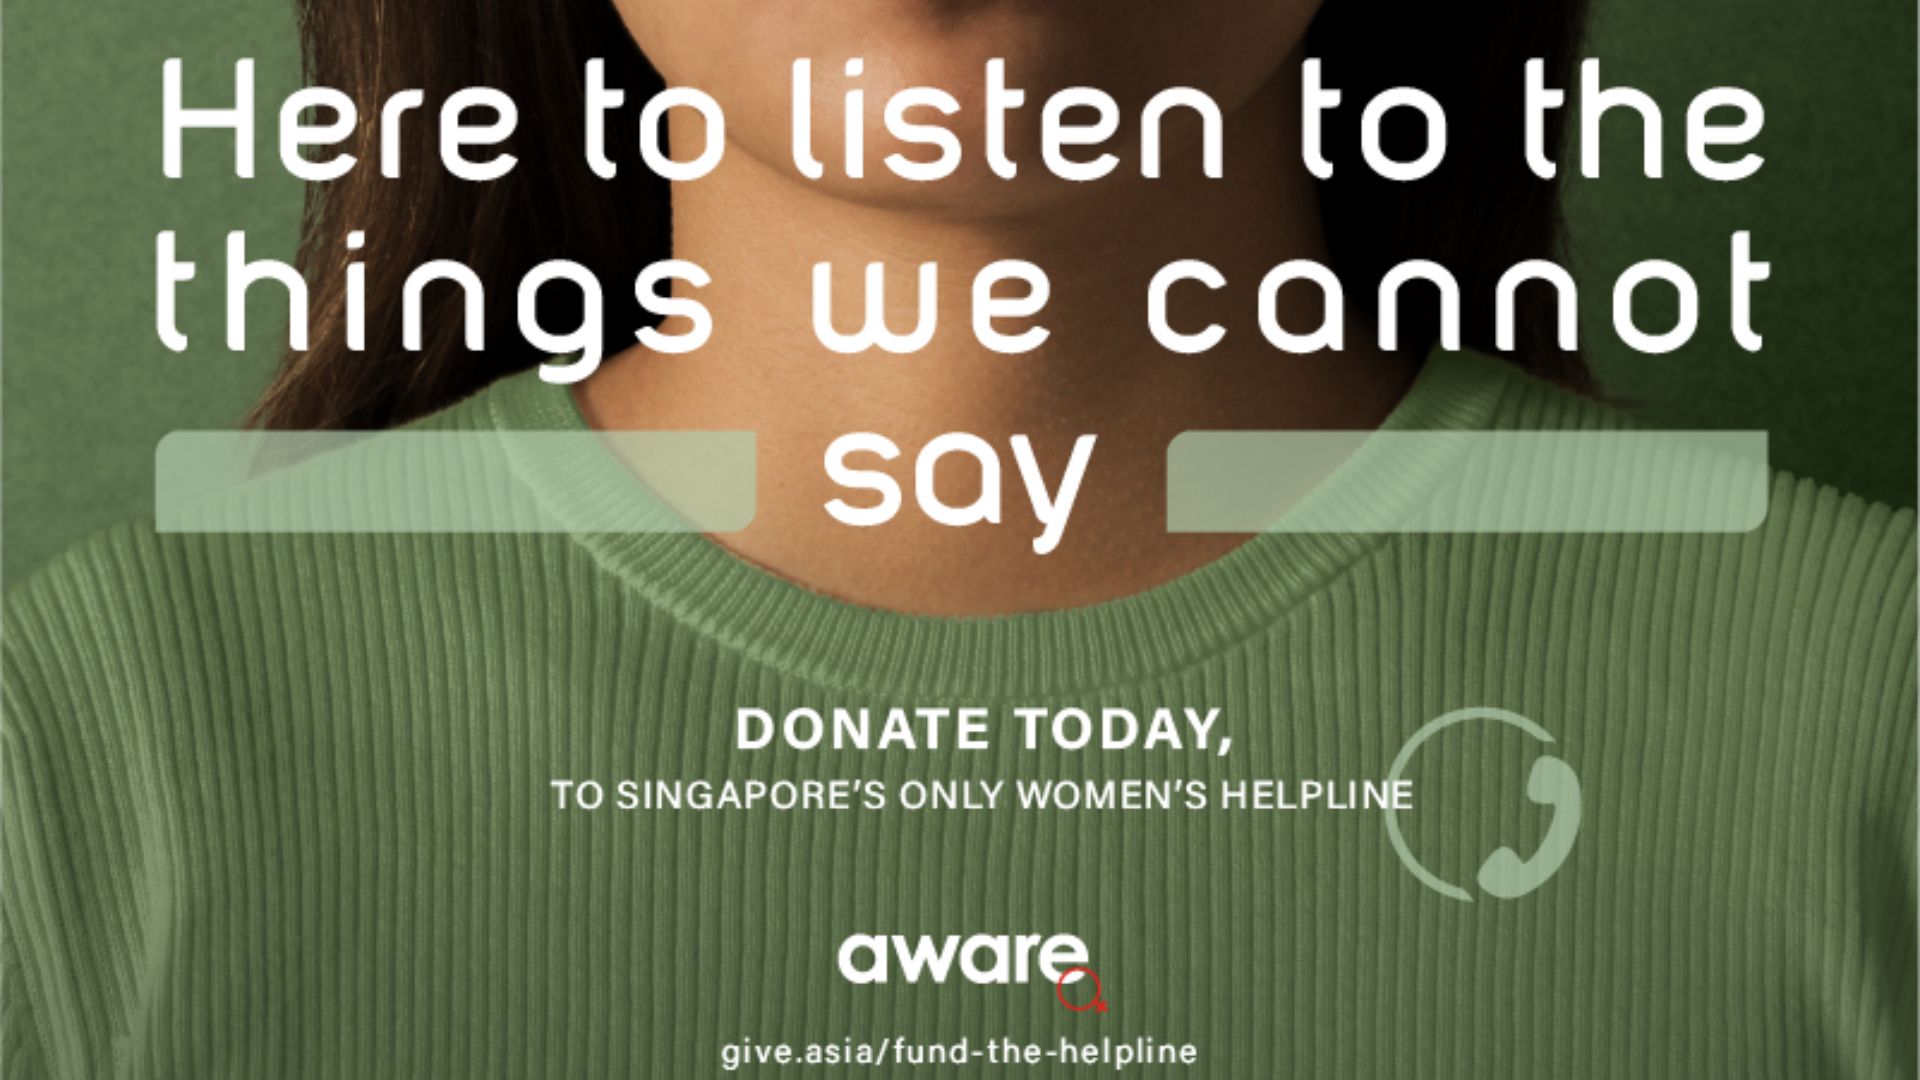 AWARE Helpline turns 30, growing from a phone call away to online chats, emails